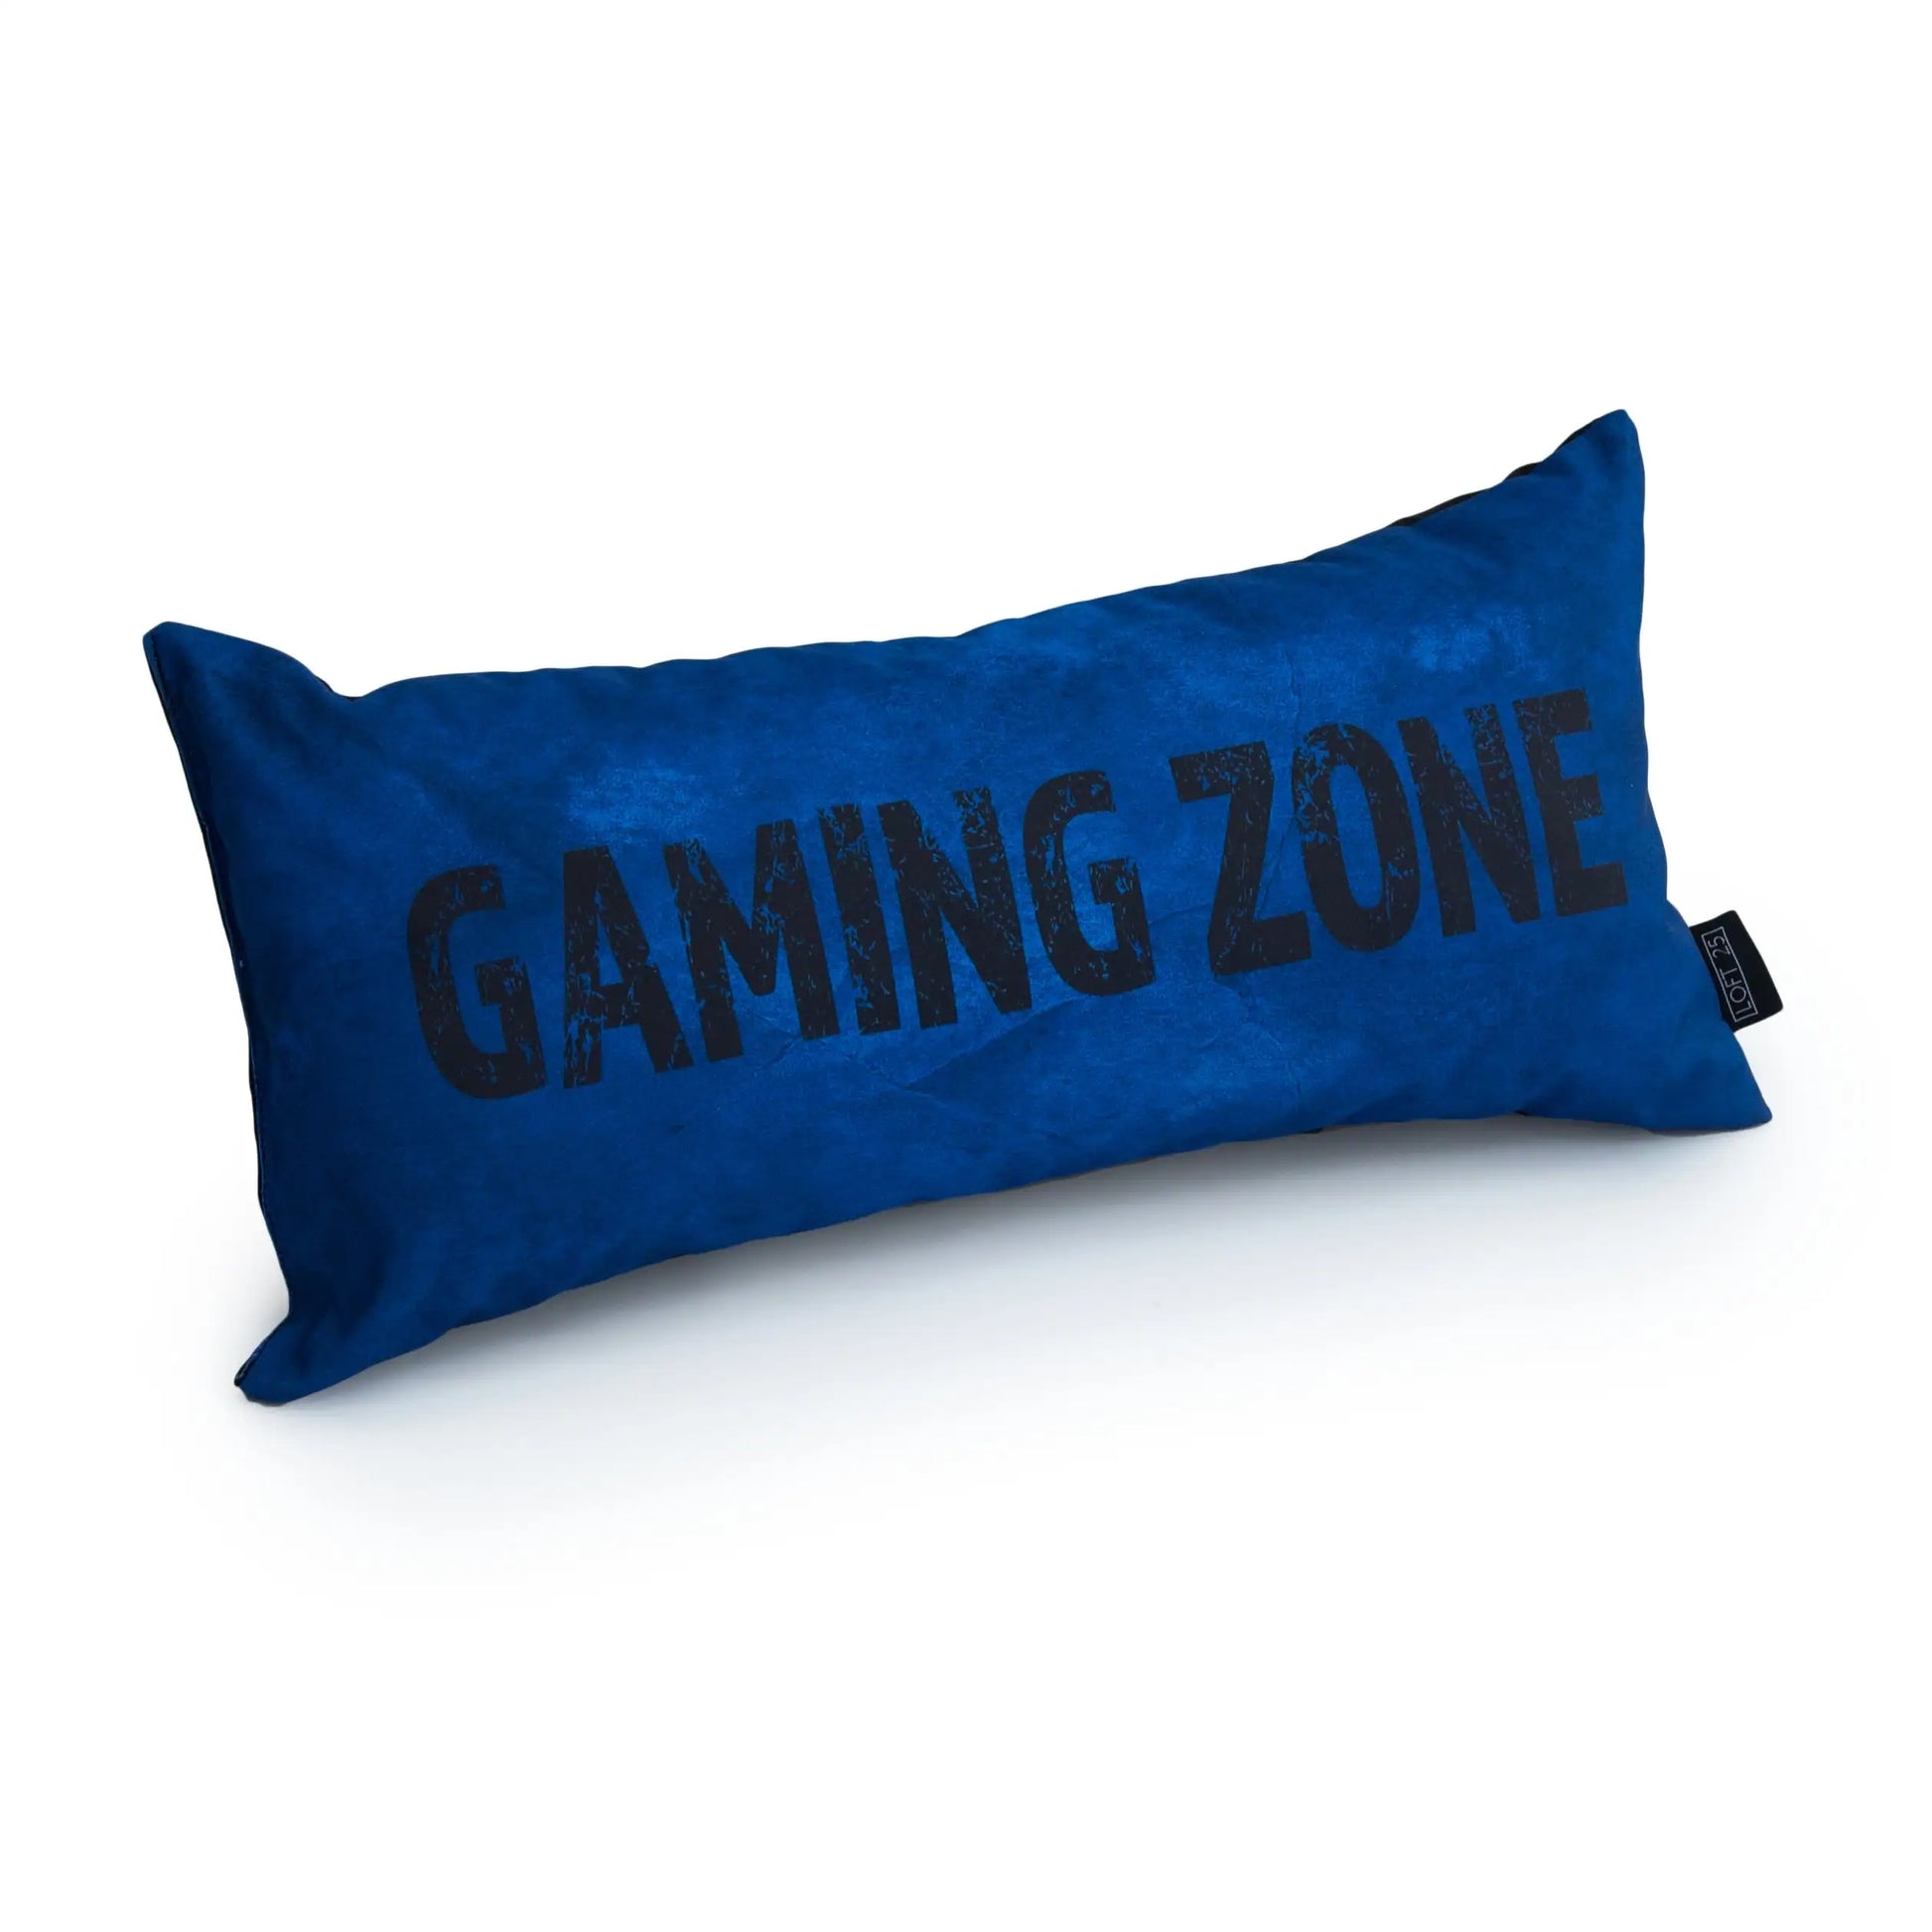 A blue pillow with the words "GAMING ZONE" written on it.